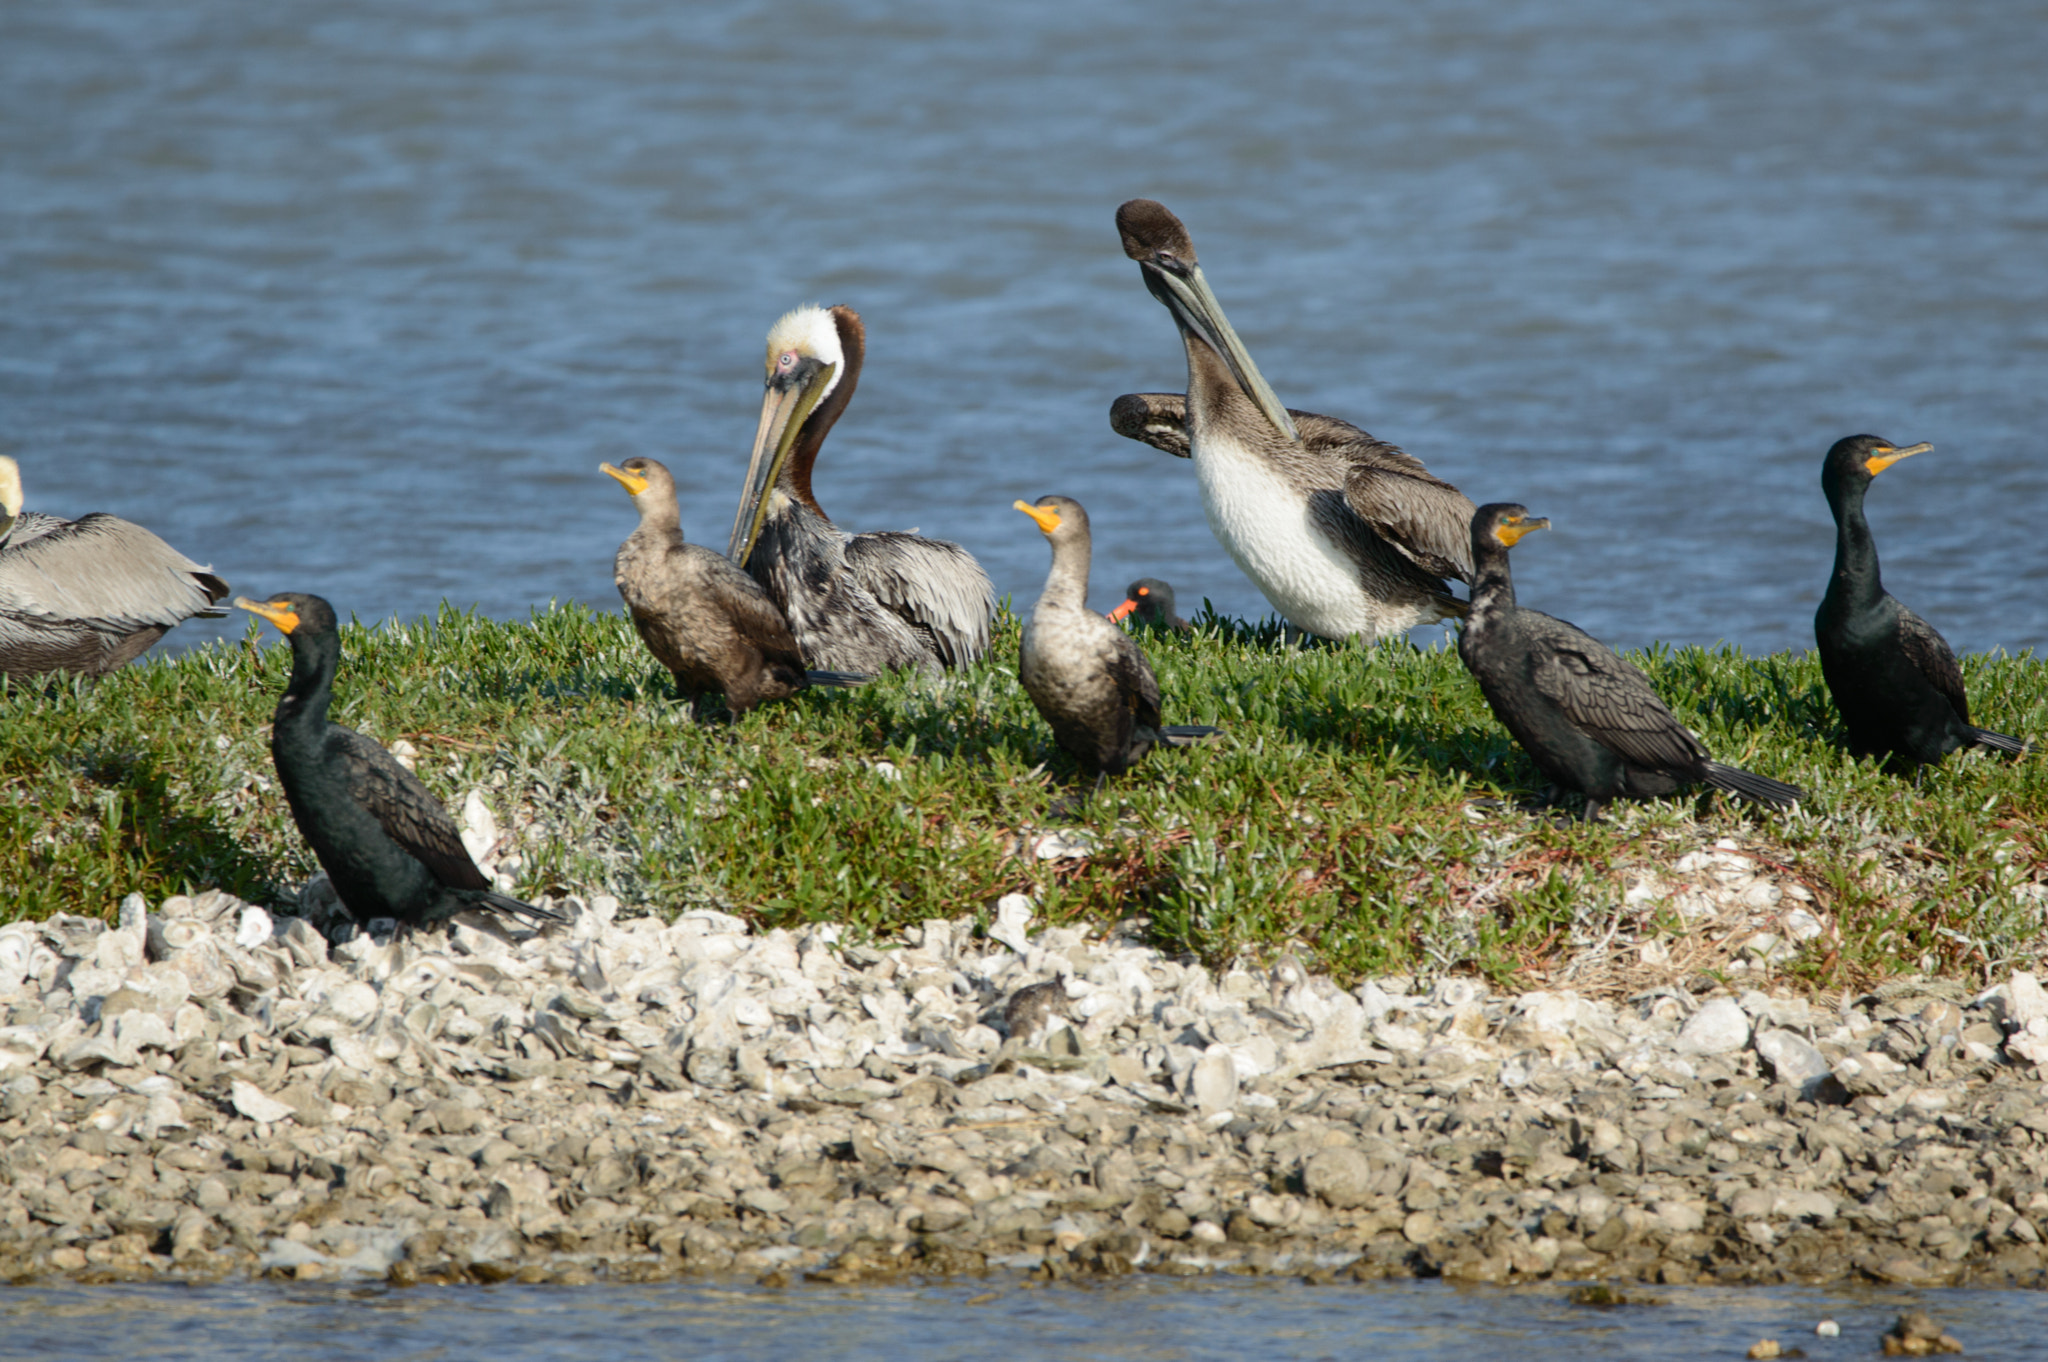 Nikon D3200 + Sigma 150-600mm F5-6.3 DG OS HSM | C sample photo. Pelicans and ducks hanging out photography